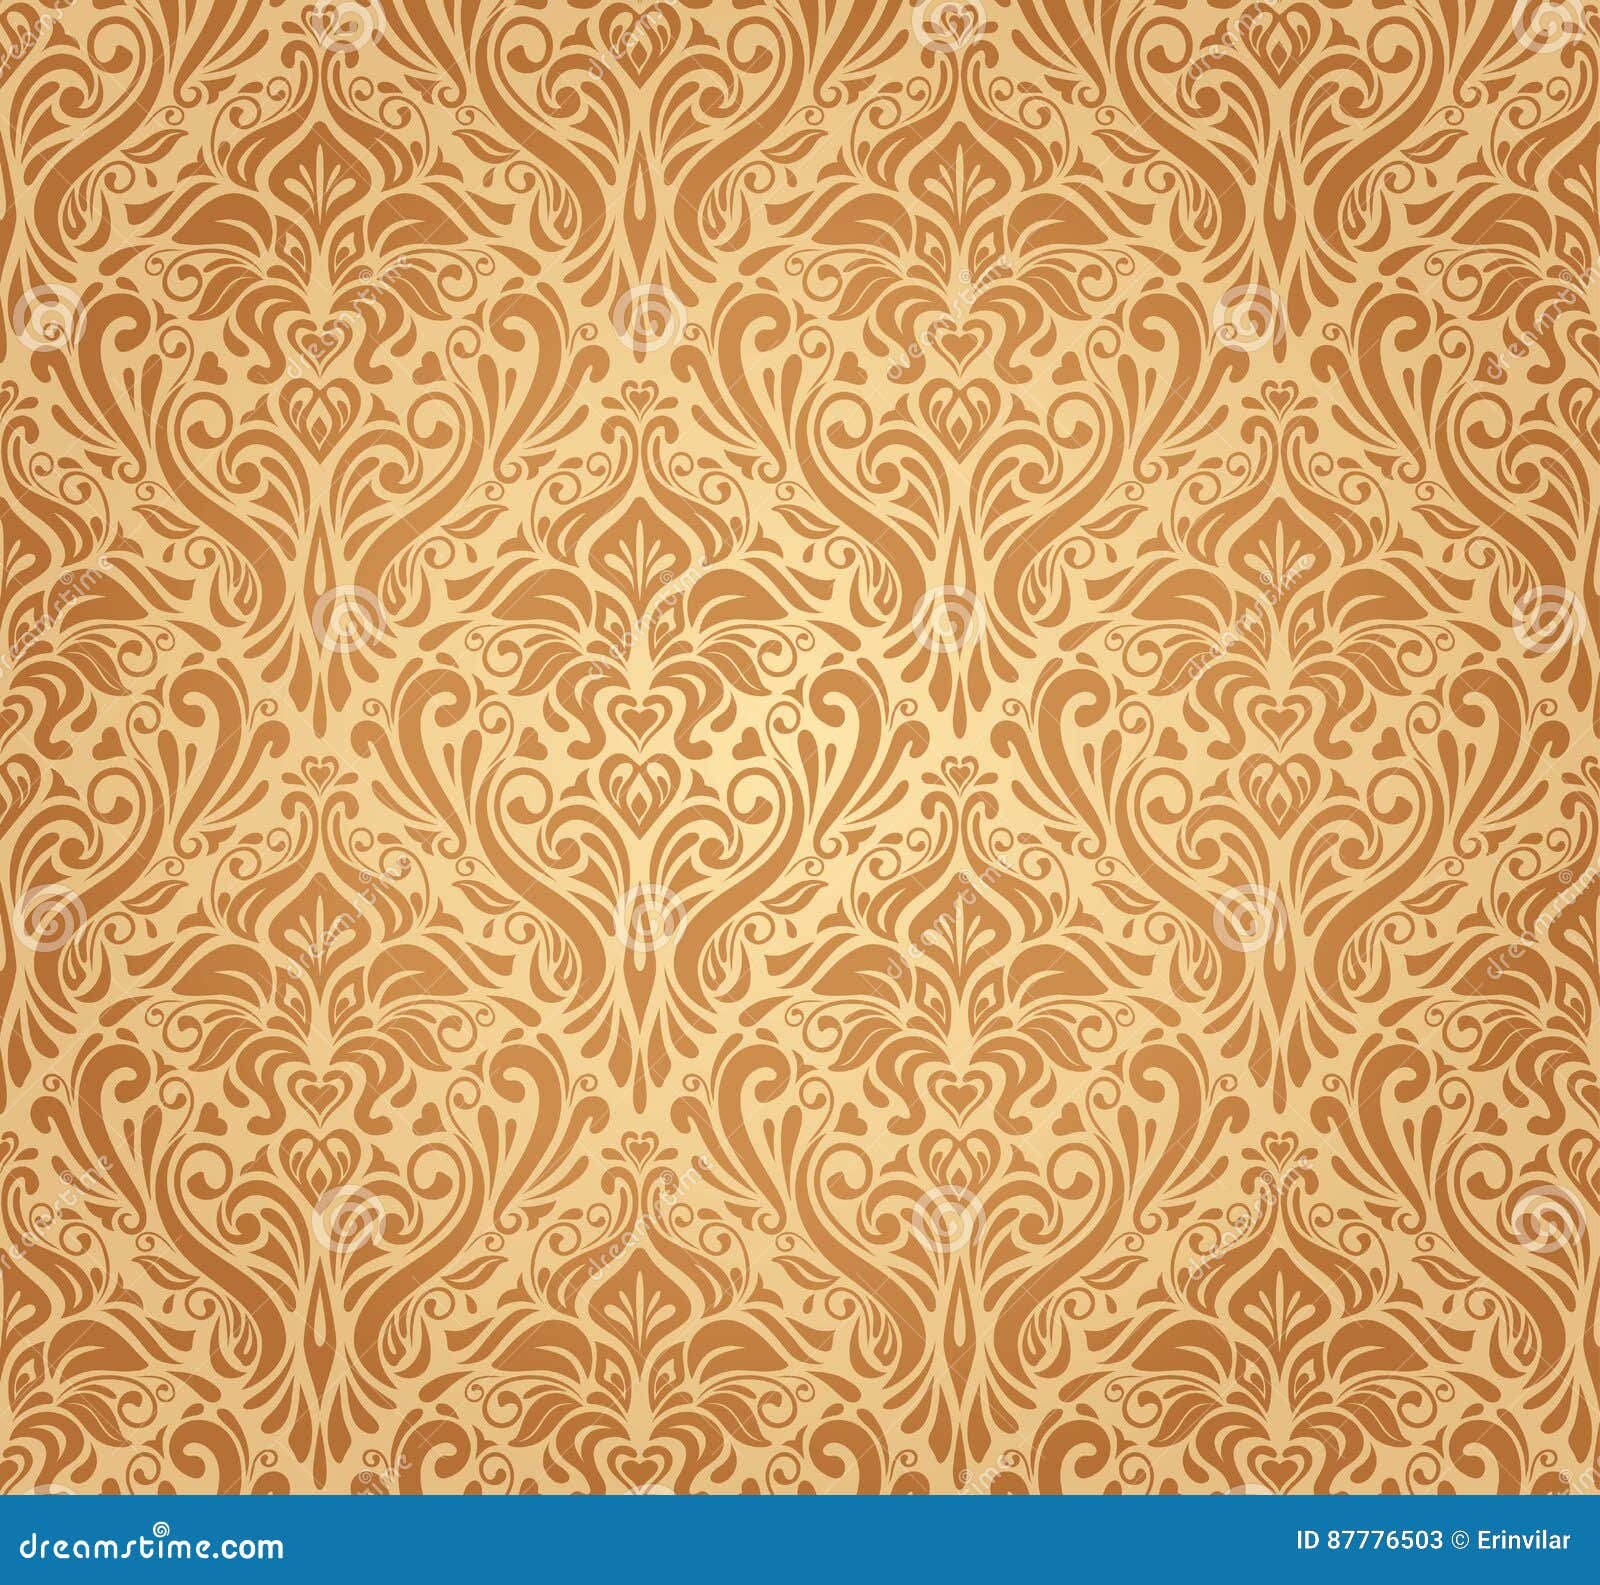 Floral Pattern Wallpaper for Walls | Muted Floral